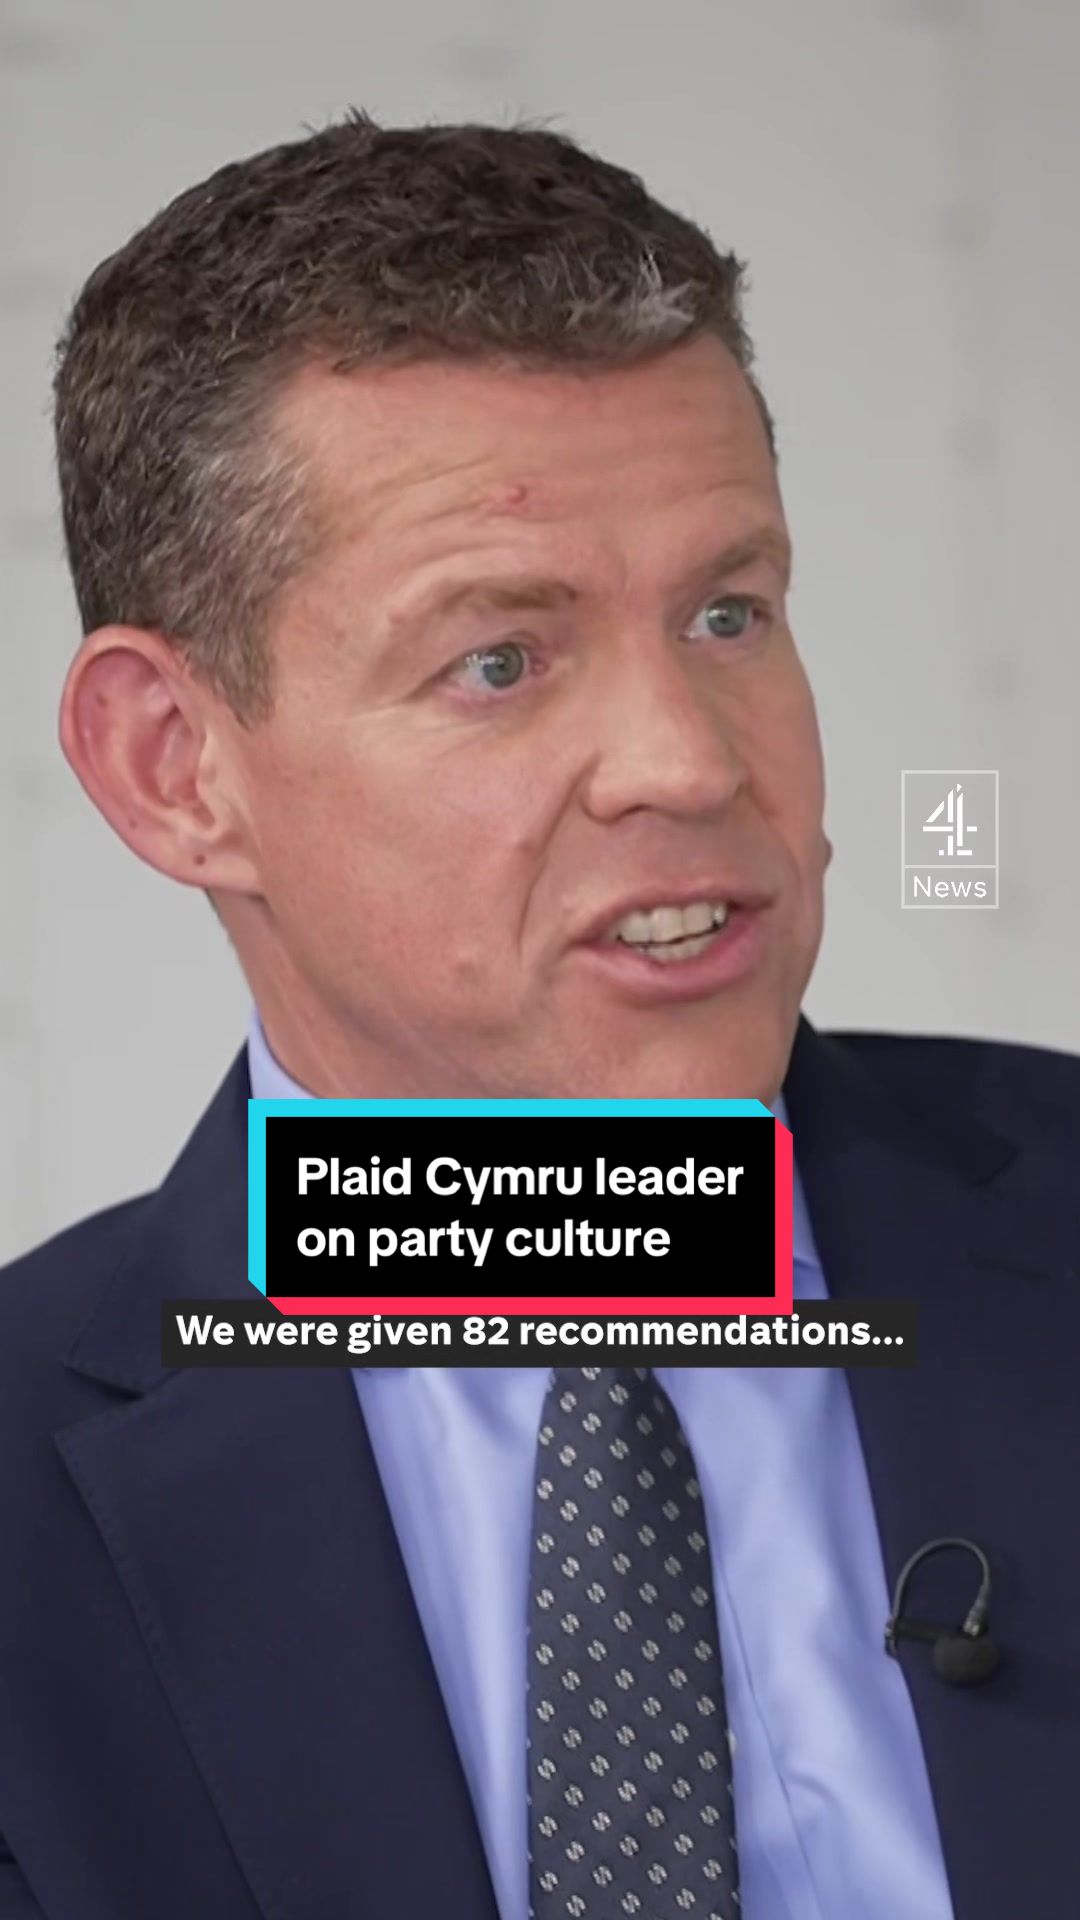 Rhun ap Iorwerth, leader of Plaid Cymru, says "things have changed fundamentally" after a report found in May last year "a culture of harassment, bullying and misogyny" within the party. #PlaidCymru #RhunapIorwerth #Welshpolitics #UKpolitics #Channel4News #C4News